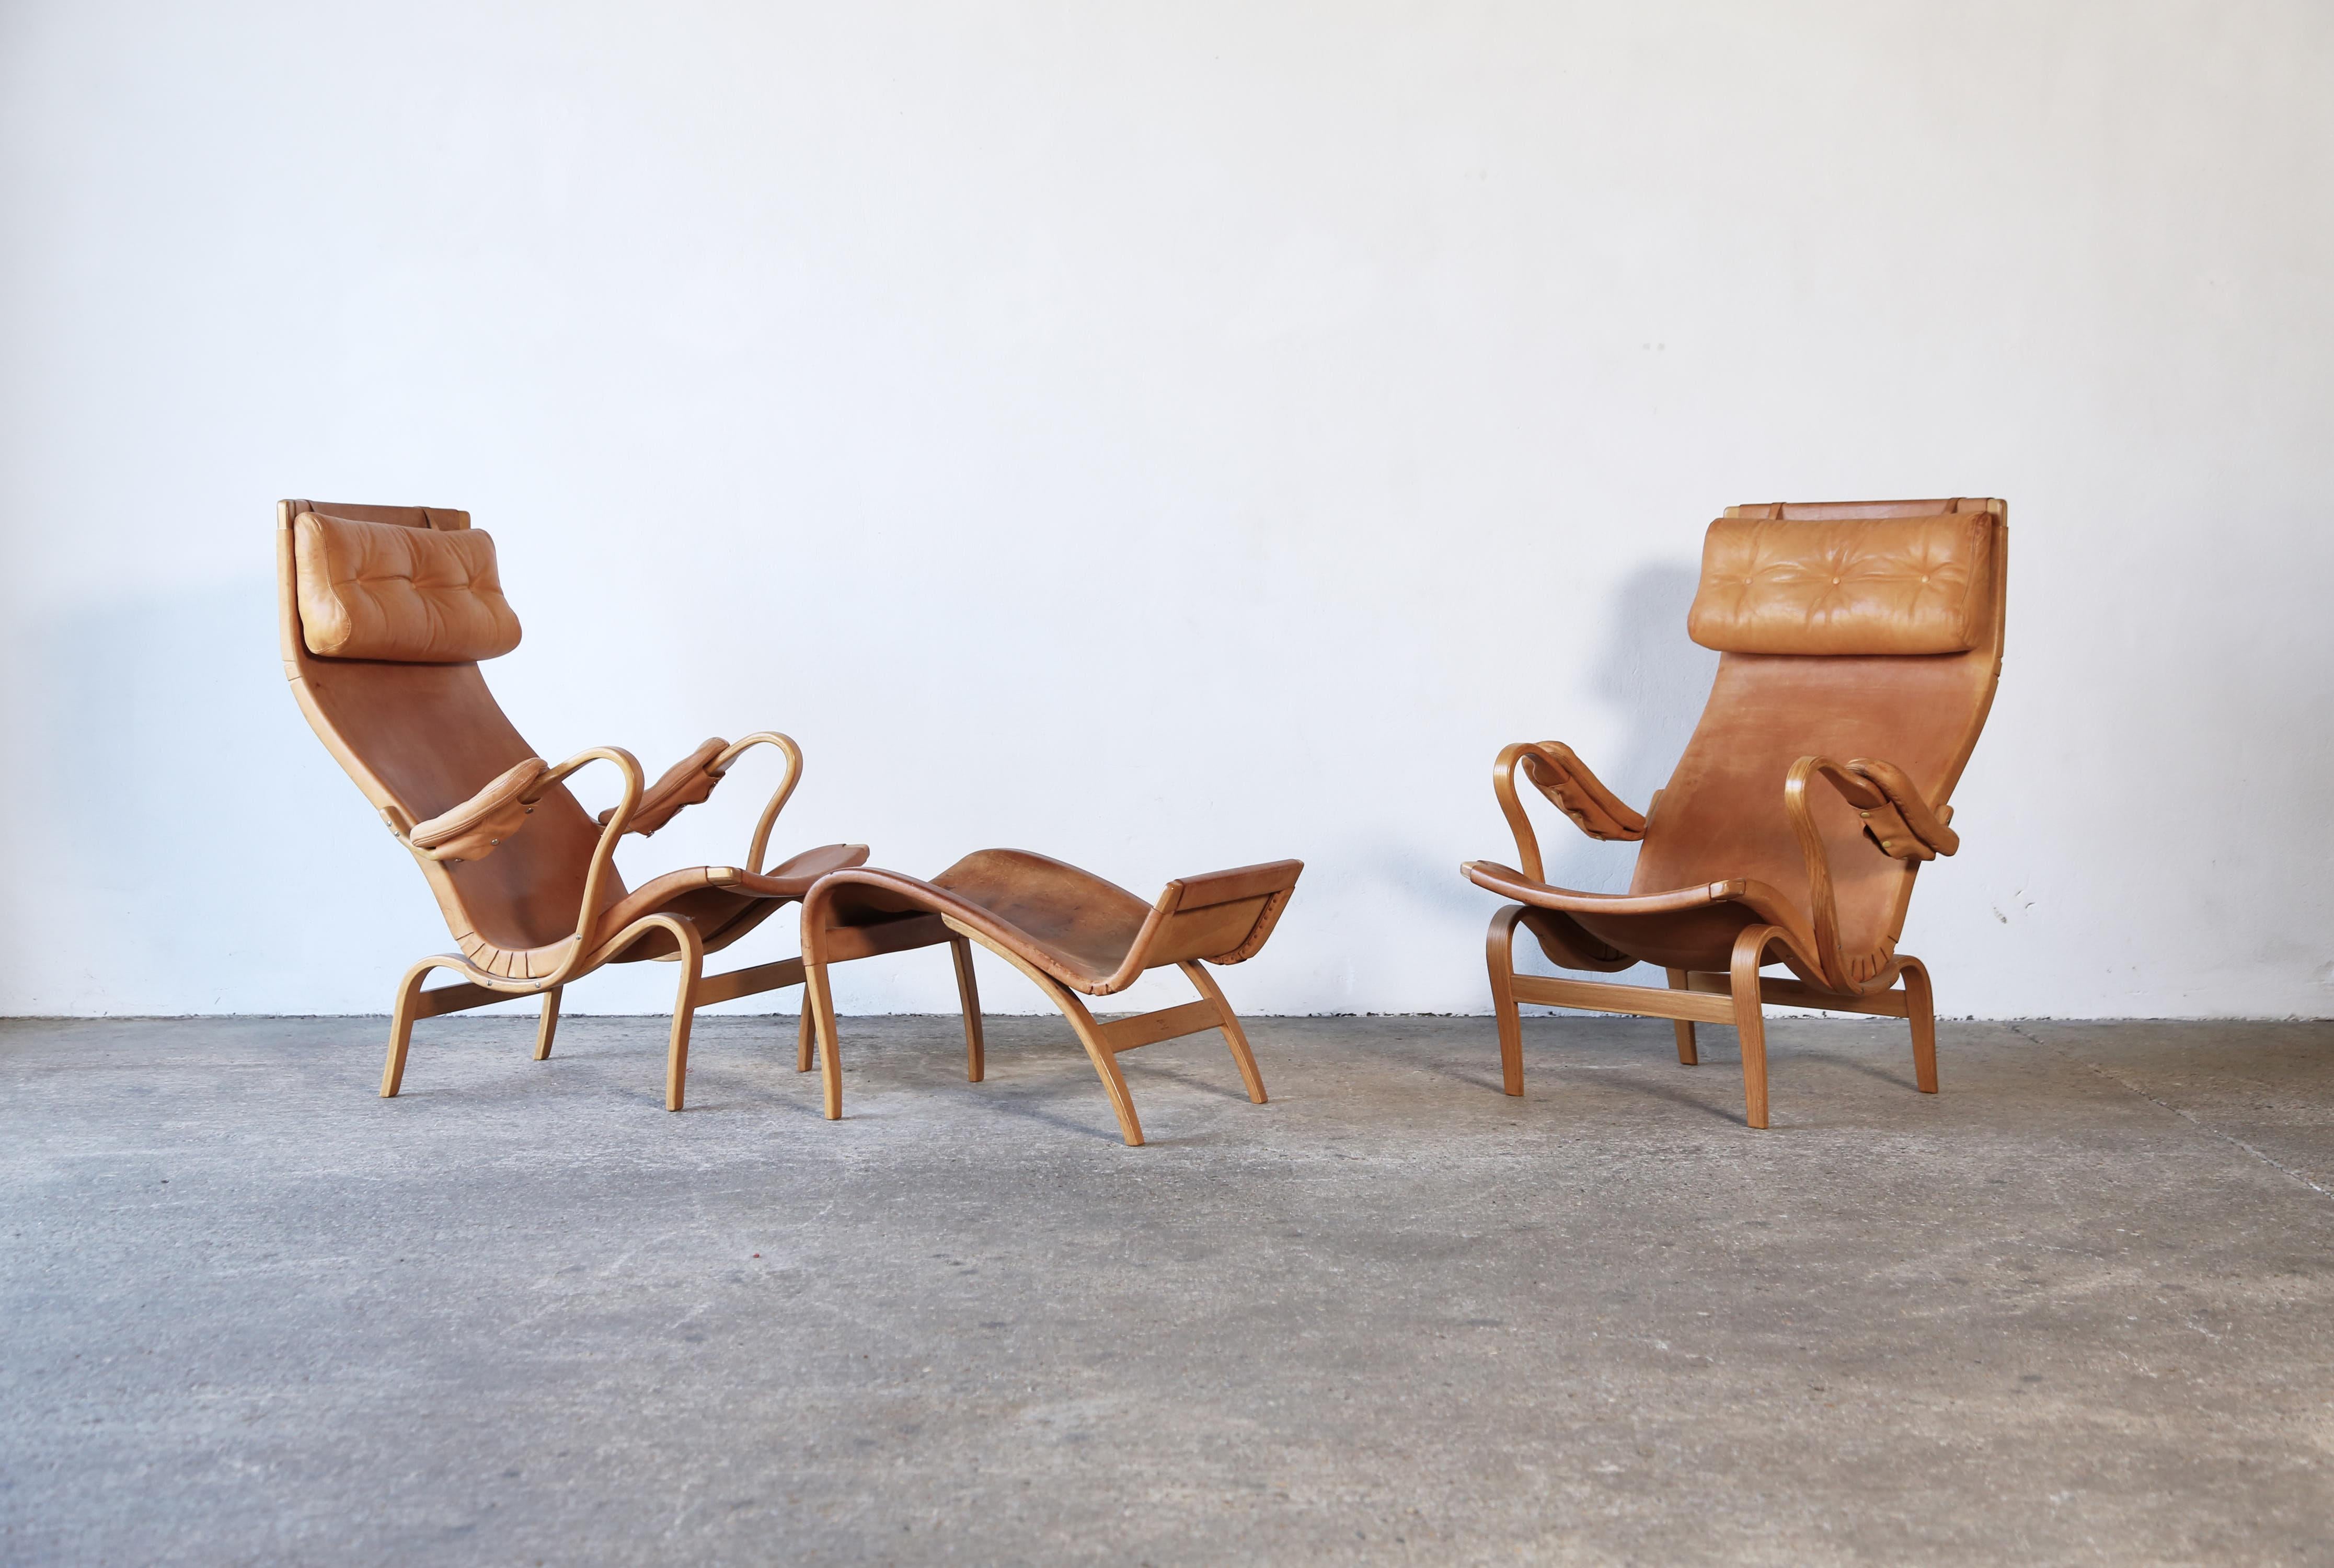 A very rare pair of Pernilla chairs and ottoman by Bruno Mathsson, for Karl Mathsson, Värnamo, Sweden, 1960s.  Beech frames and original leather seats.  Rarely found in such good condition.   The chairs show only minor marks.  Ottoman leather shows